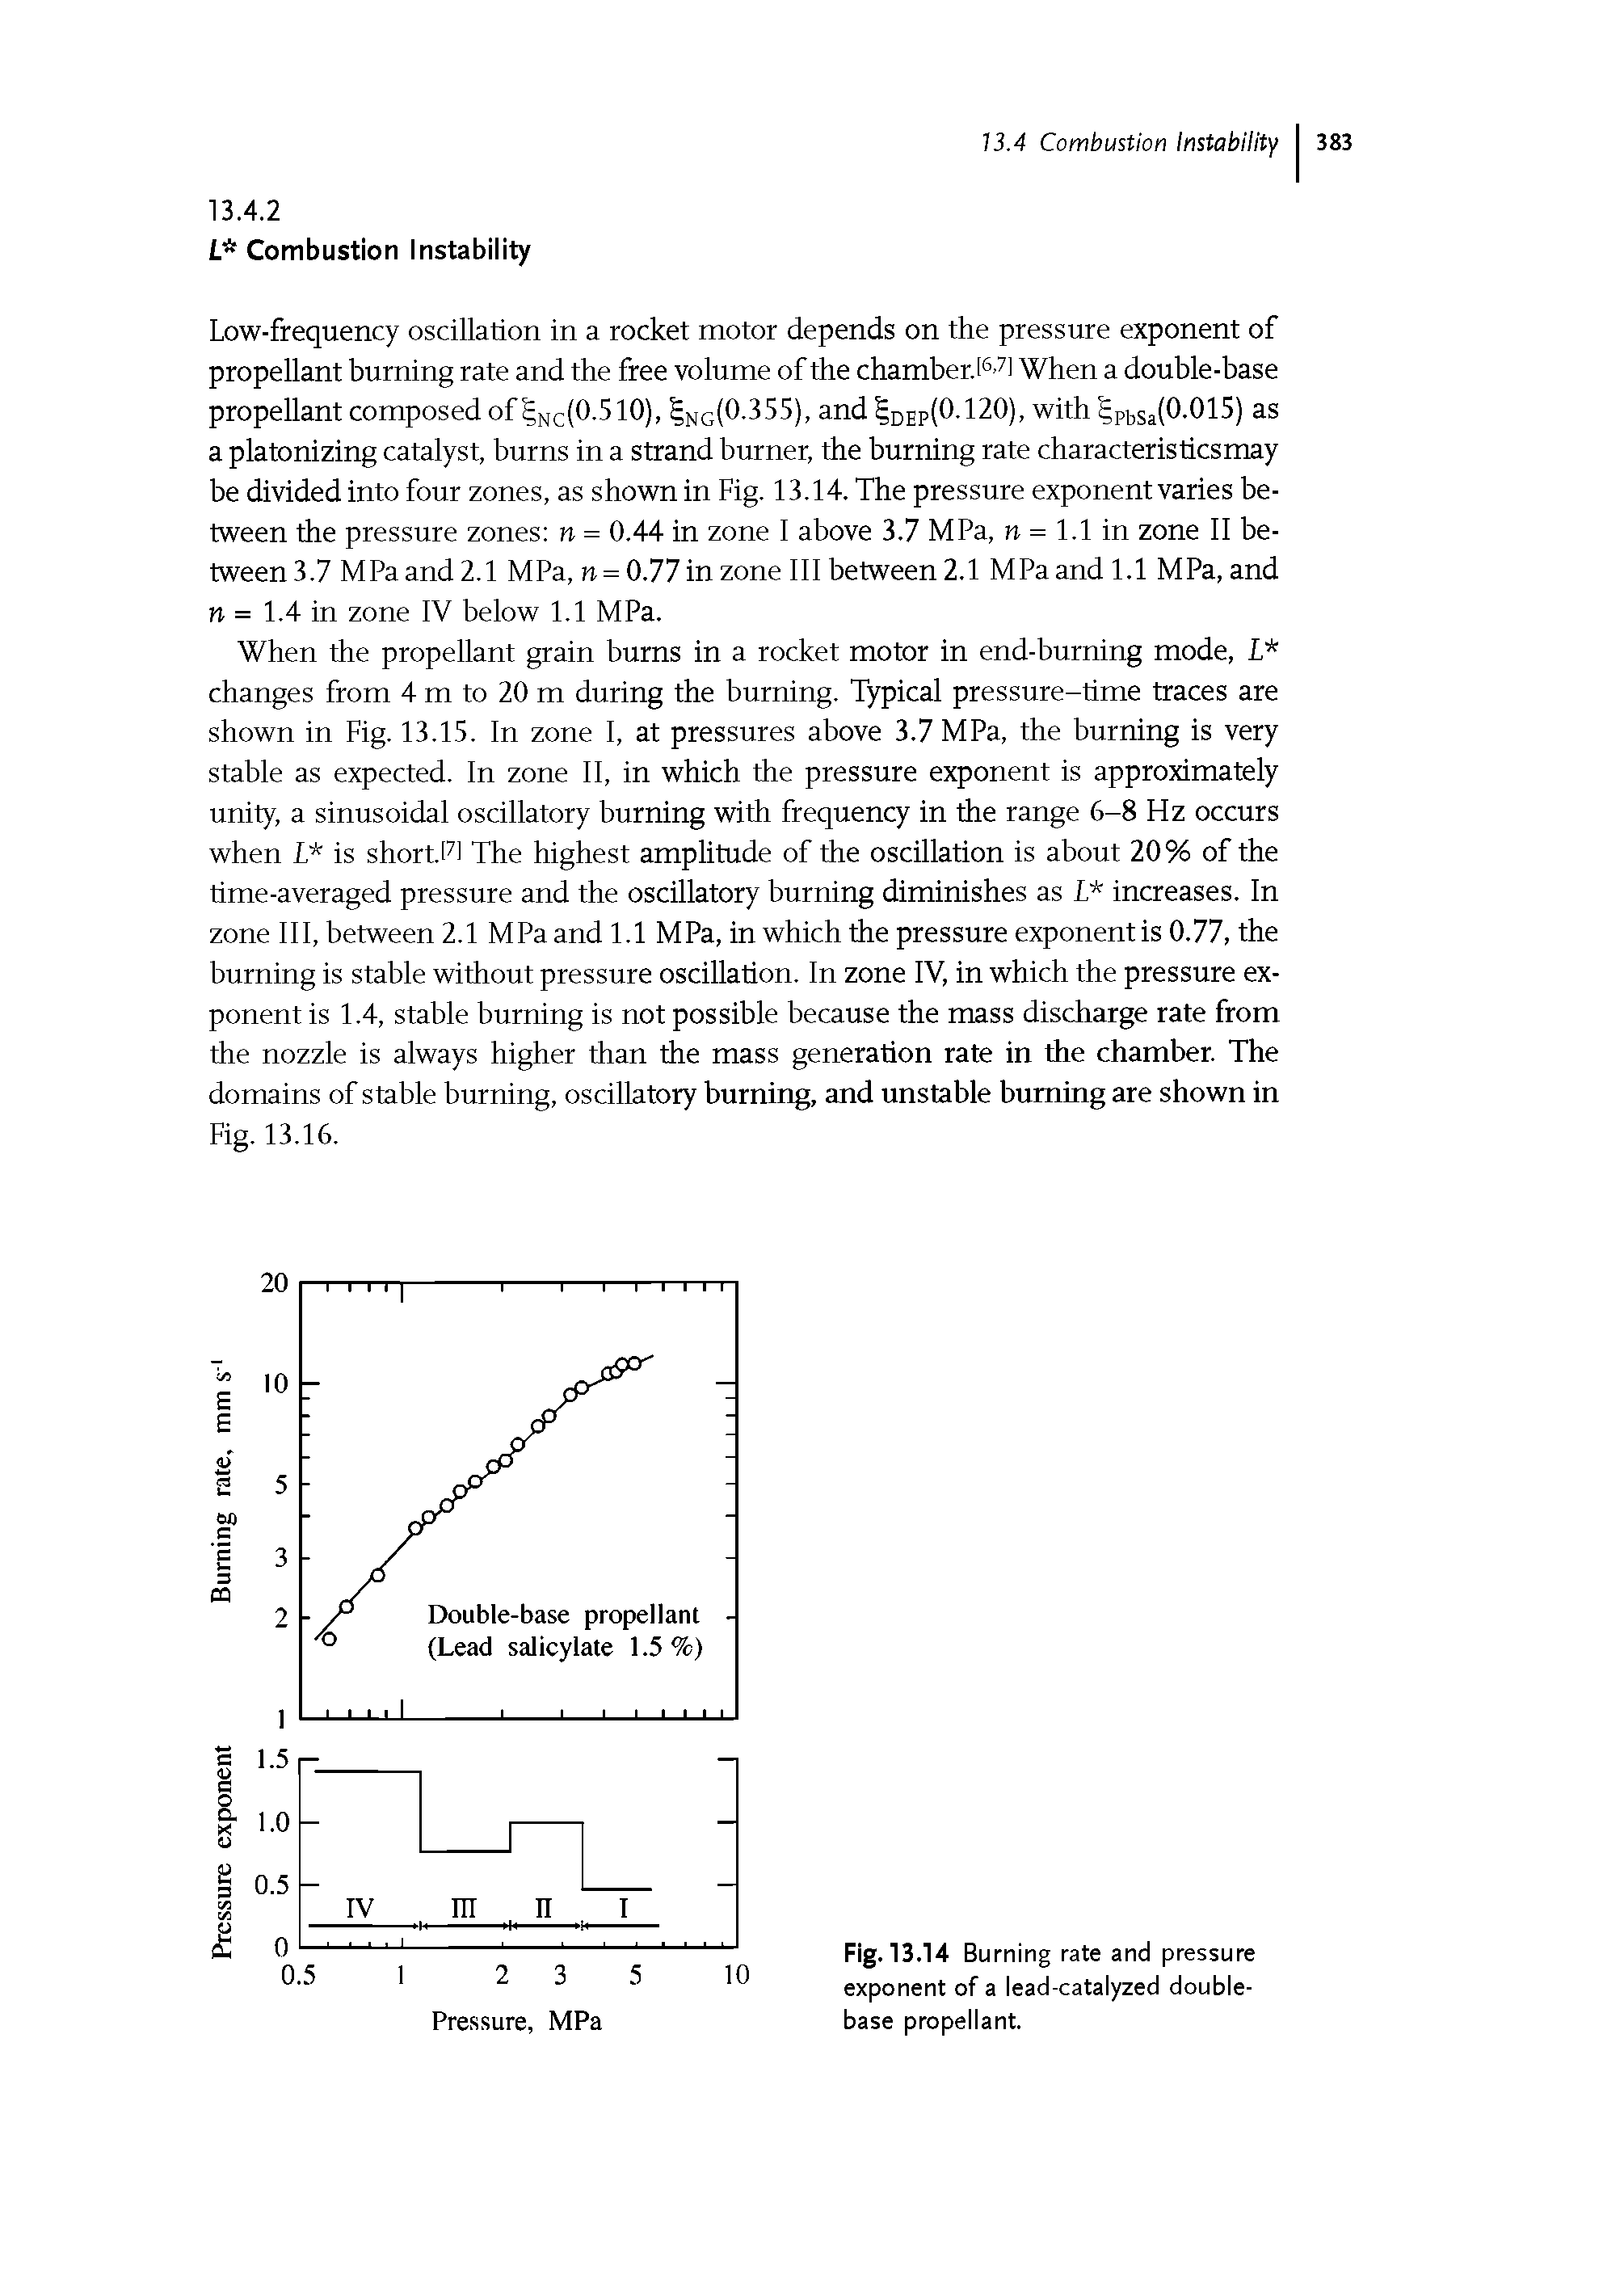 Fig. 13.14 Burning rate and pressure exponent of a lead-catalyzed doublebase propellant.